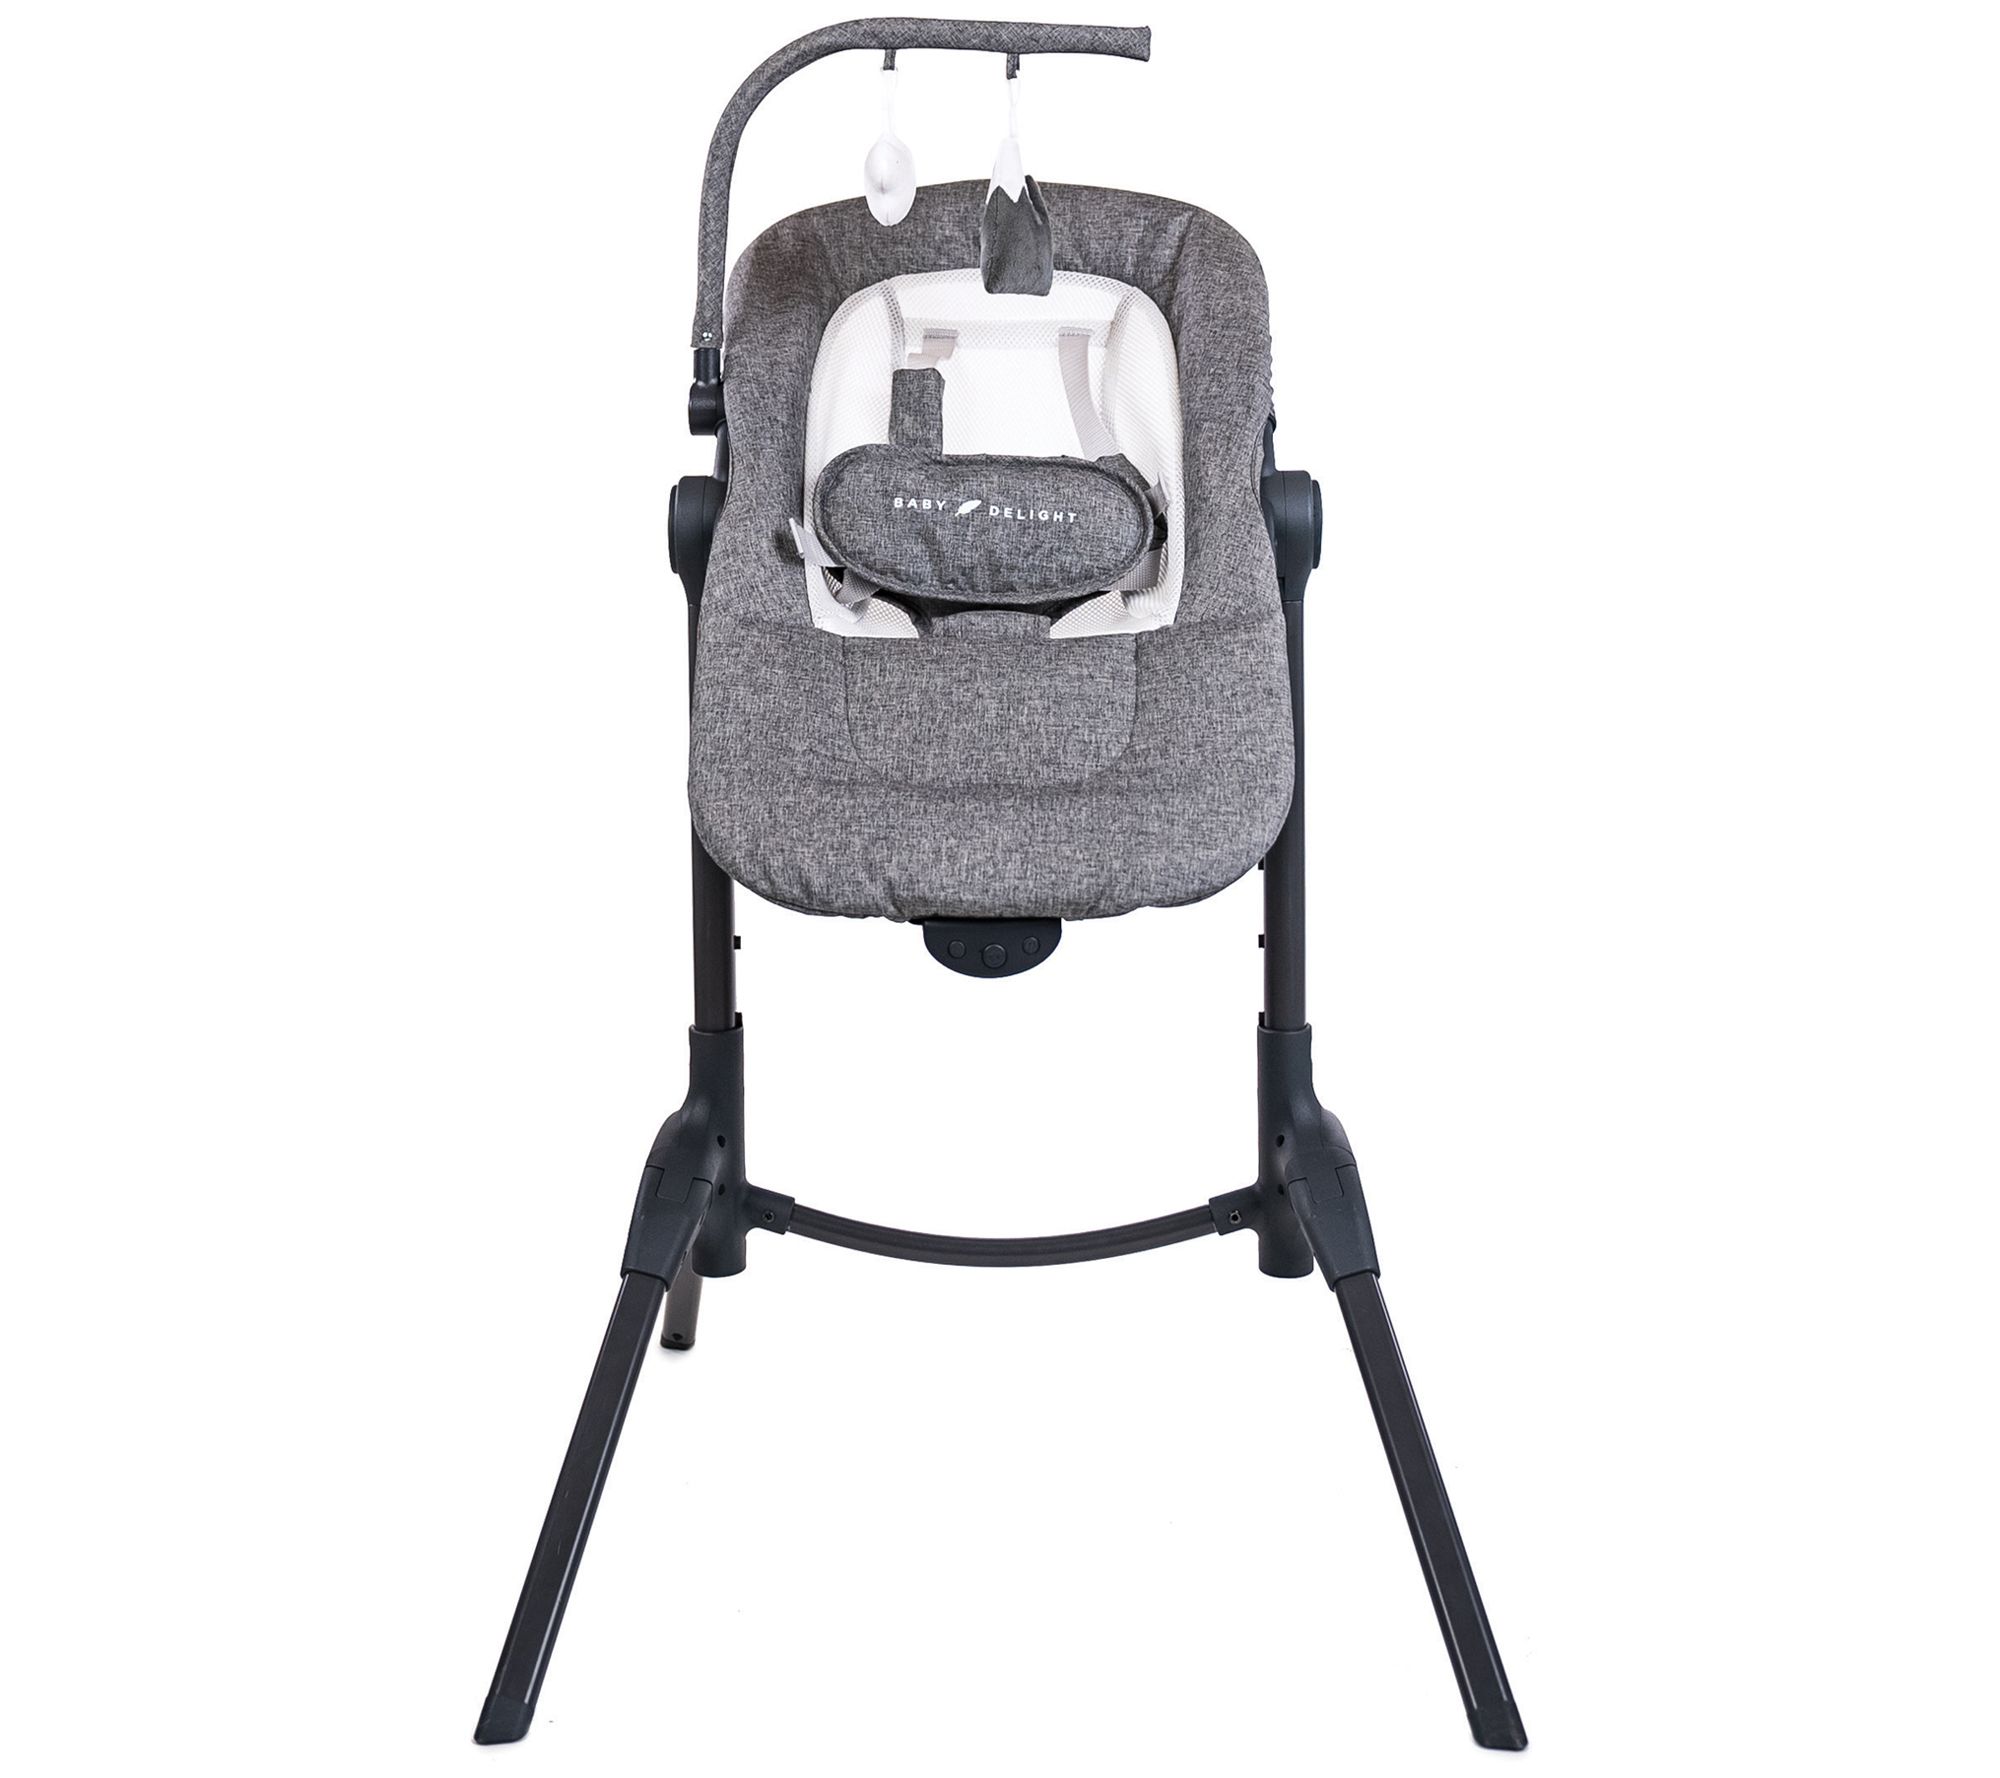 Baby Delight Bloom Soothing Adjustable Infant Lounger 